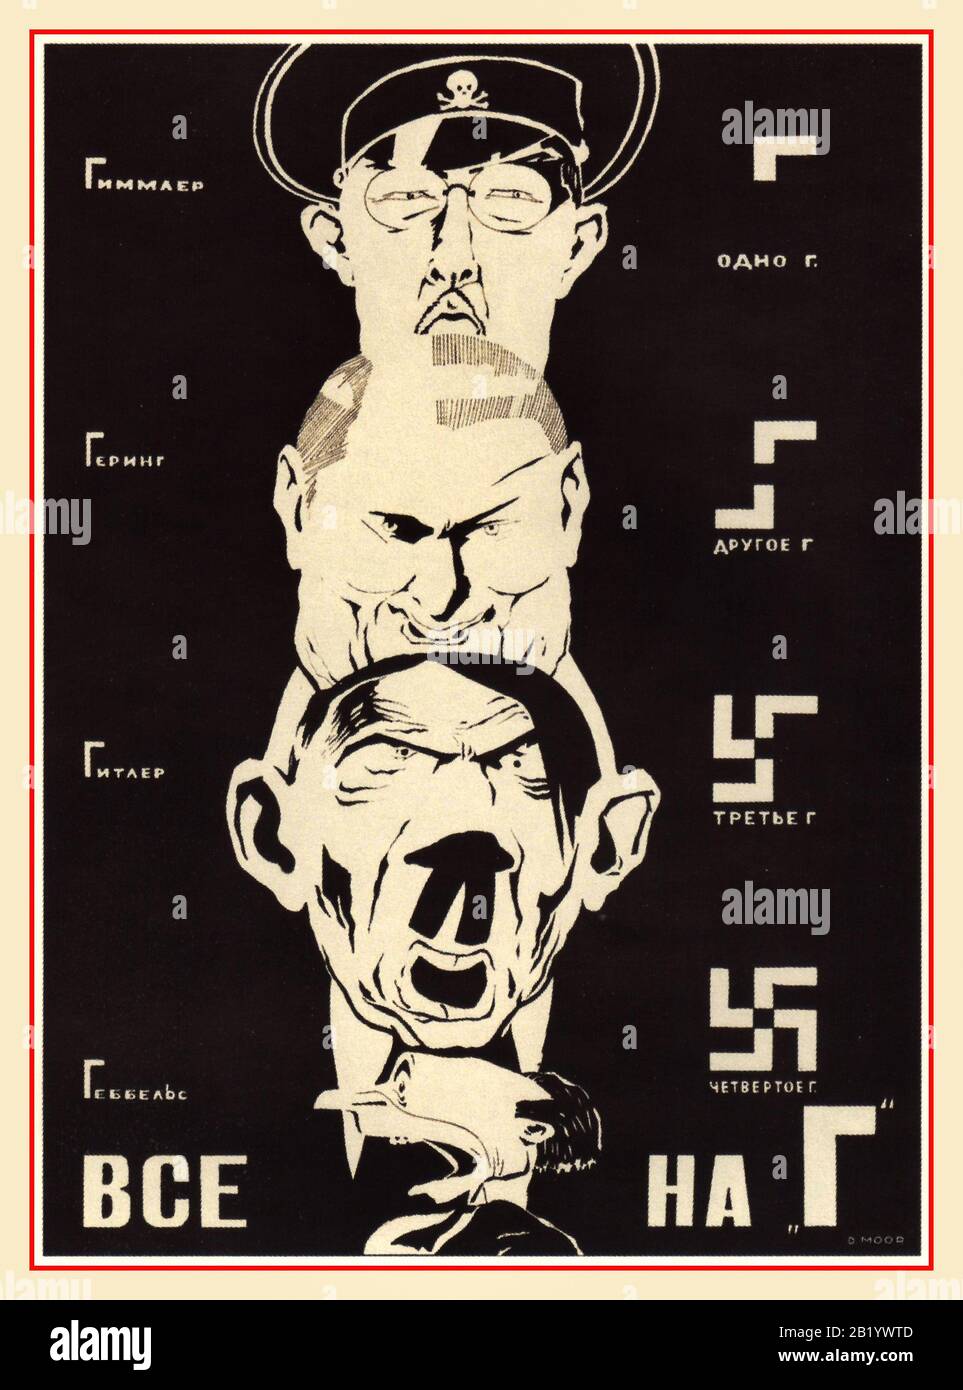 1940s Russian Propaganda anti Nazi art poster featuring ; Top, HIMMLER, GOERING, HITLER, GOEBBELS, cartoon caricatures of top leading Nazi Party members, with insulting parody on their names. Stock Photo